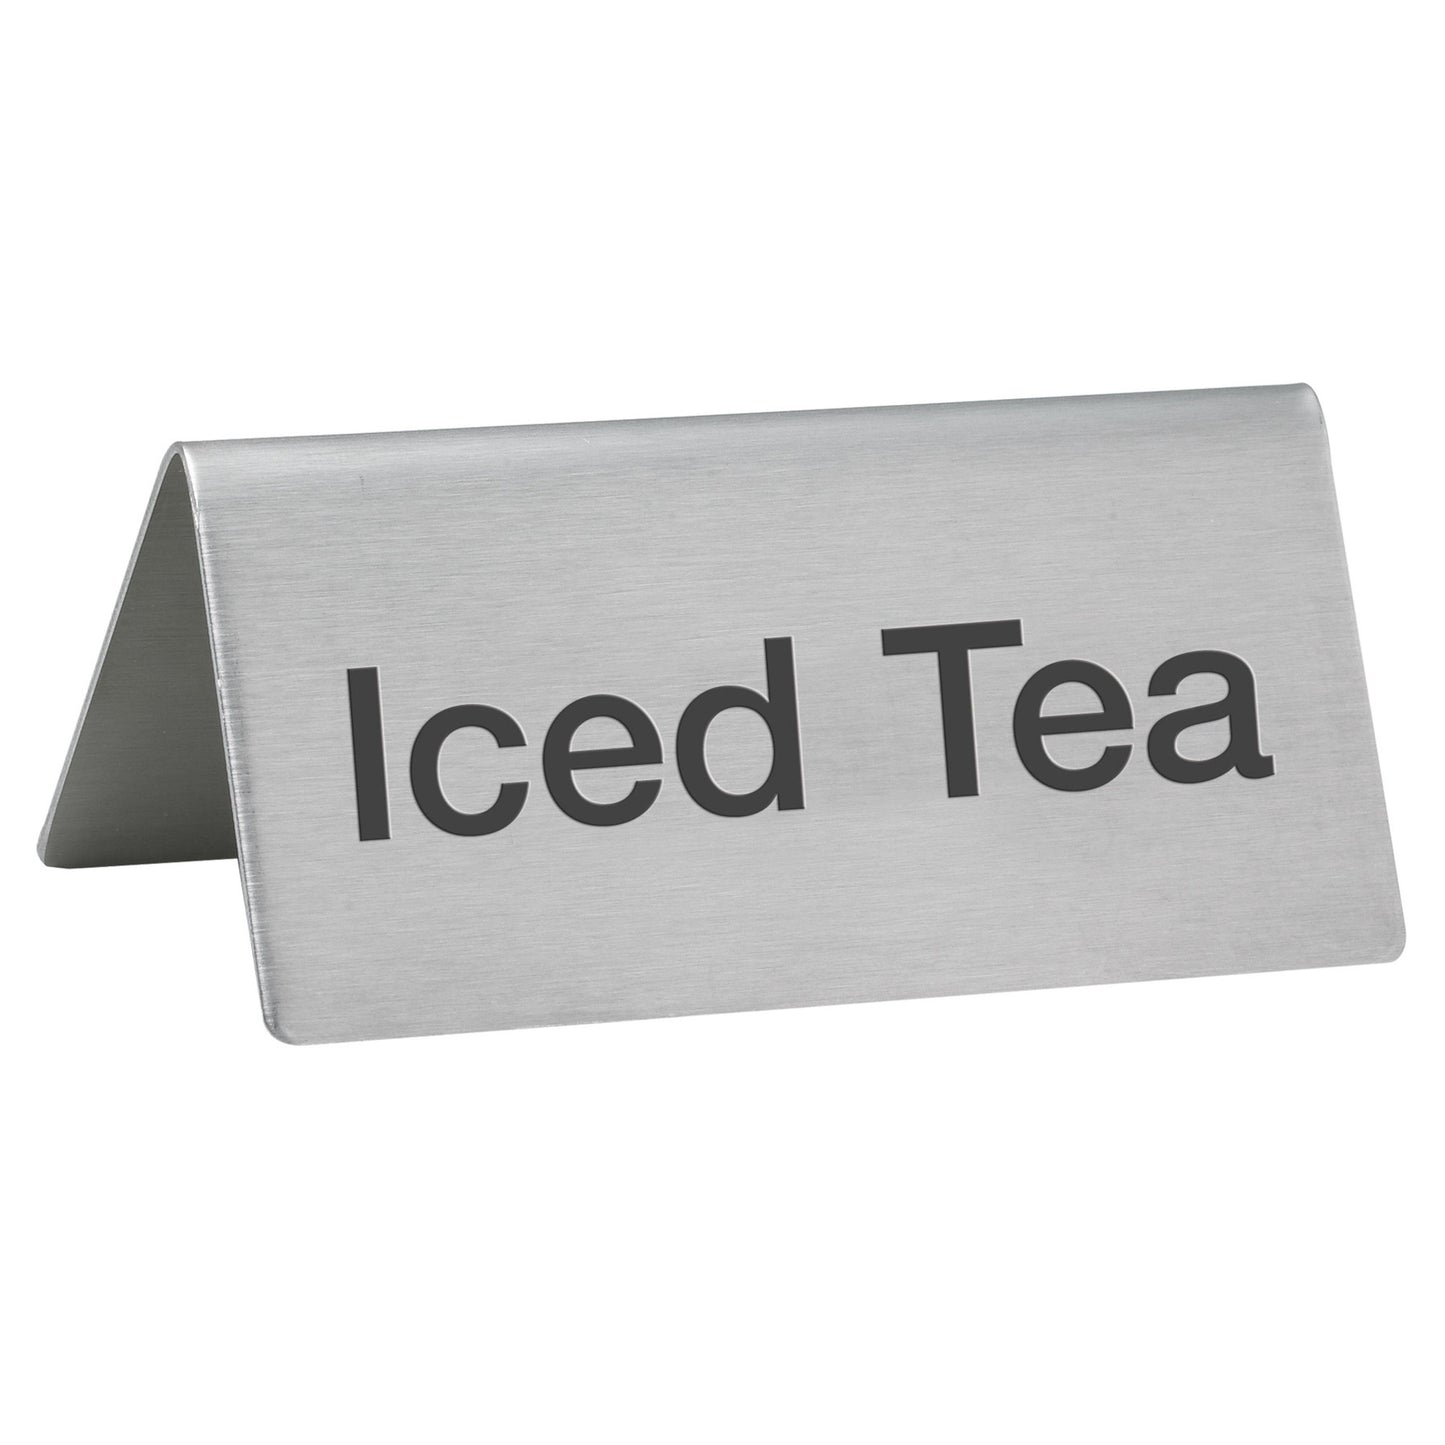 SGN-105 - Tent Sign, Stainless Steel - Iced Tea